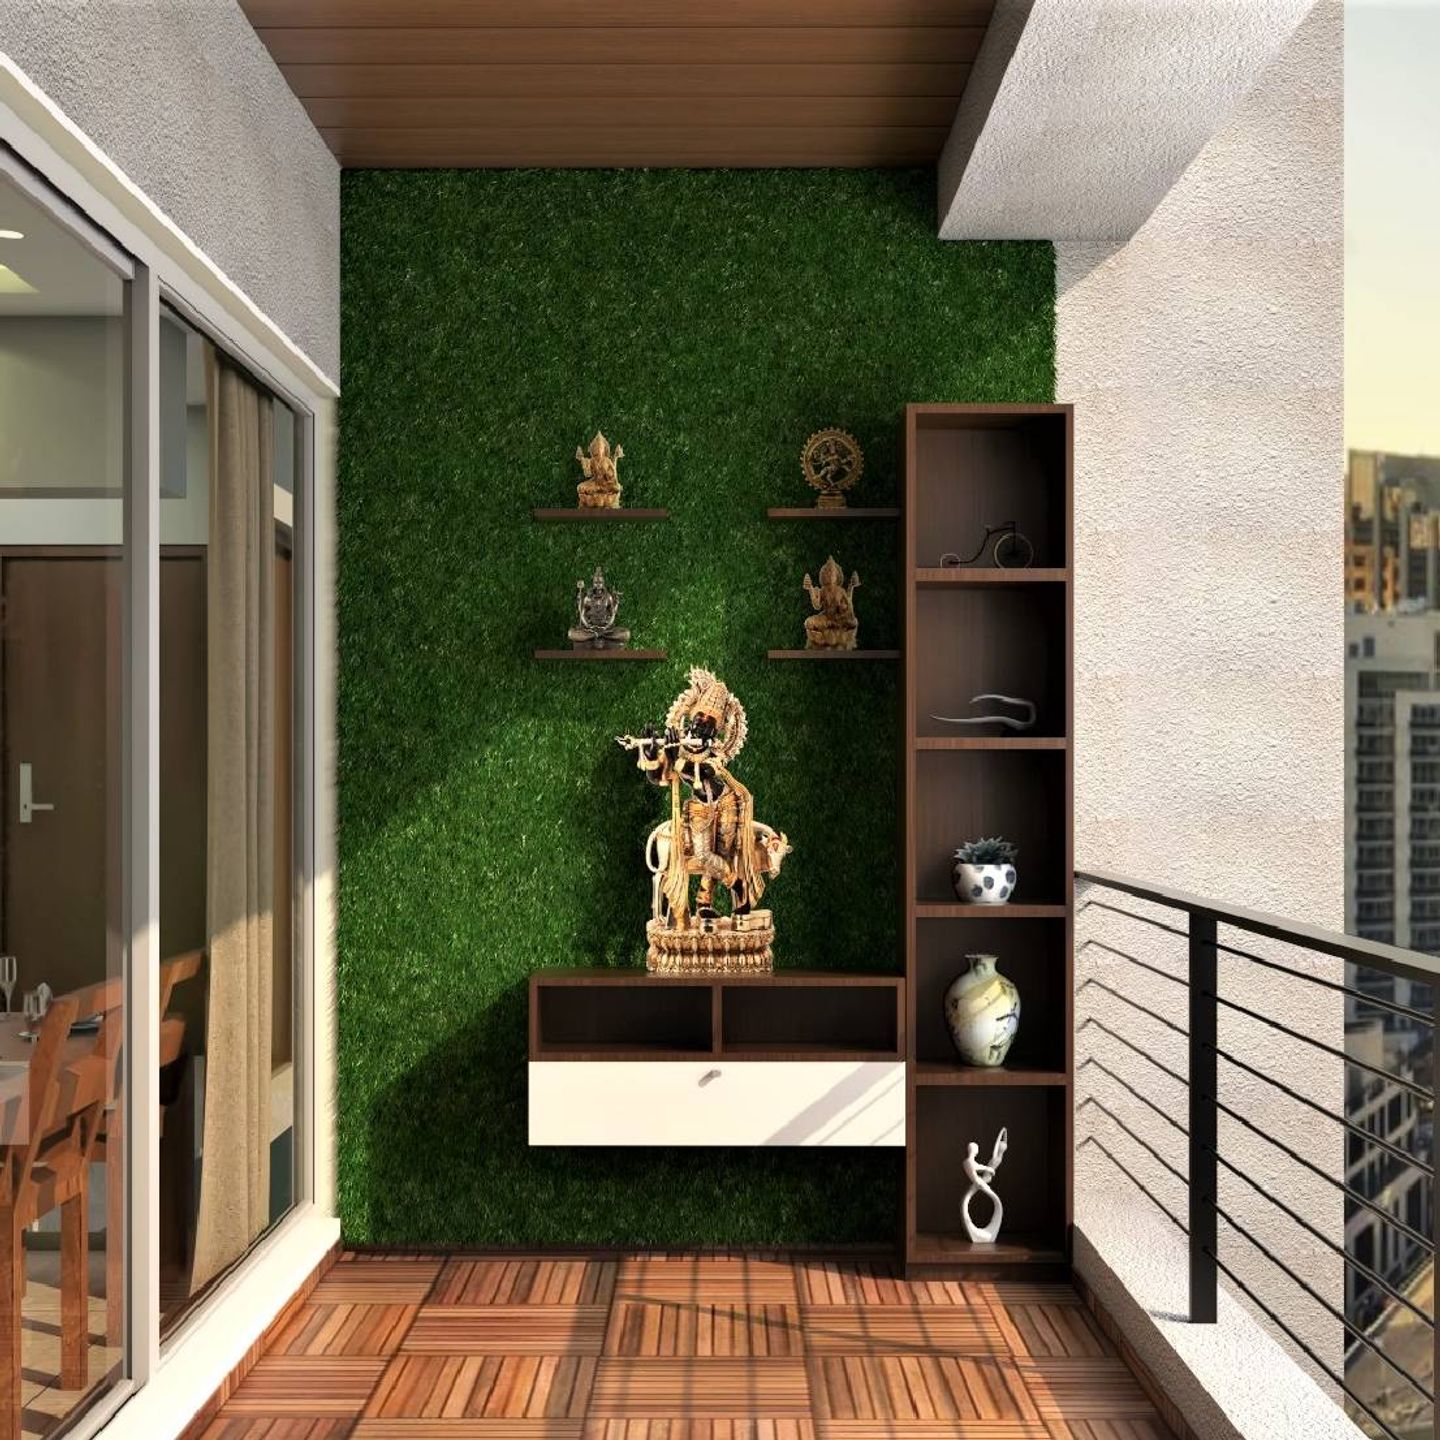 Balcony Design With Turf Grass Wall - Livspace